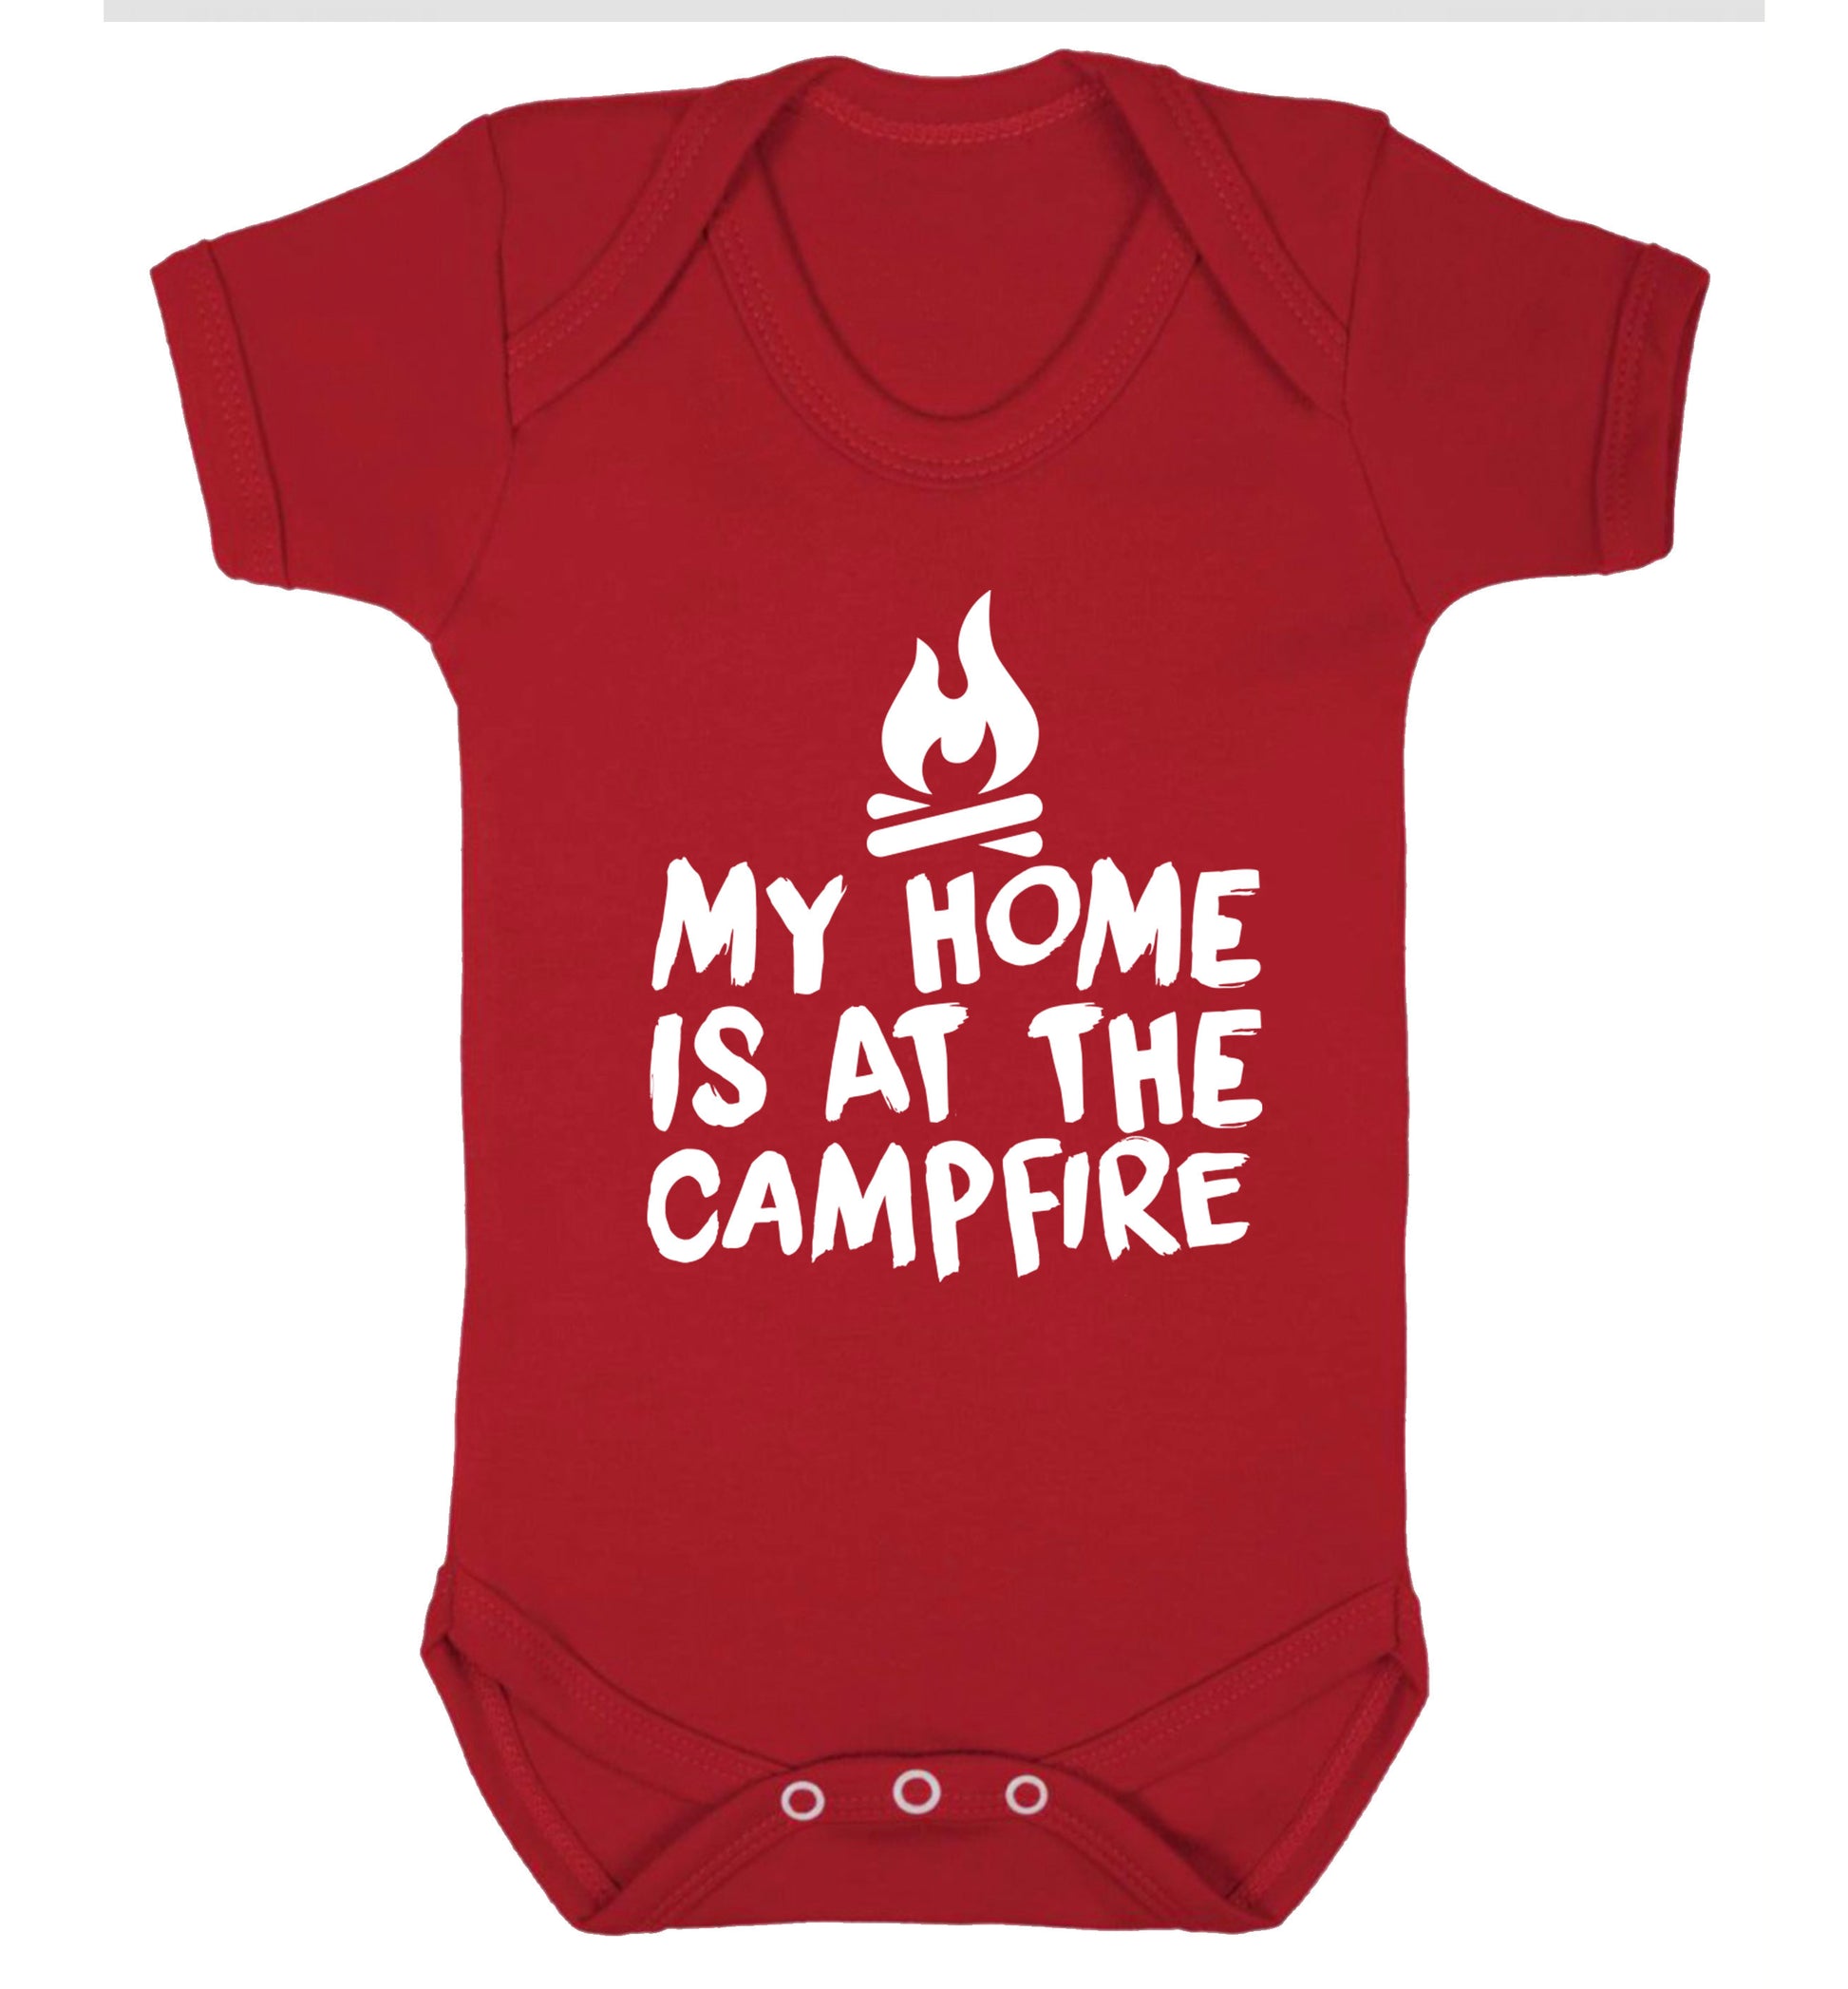 My home is at the campfire Baby Vest red 18-24 months